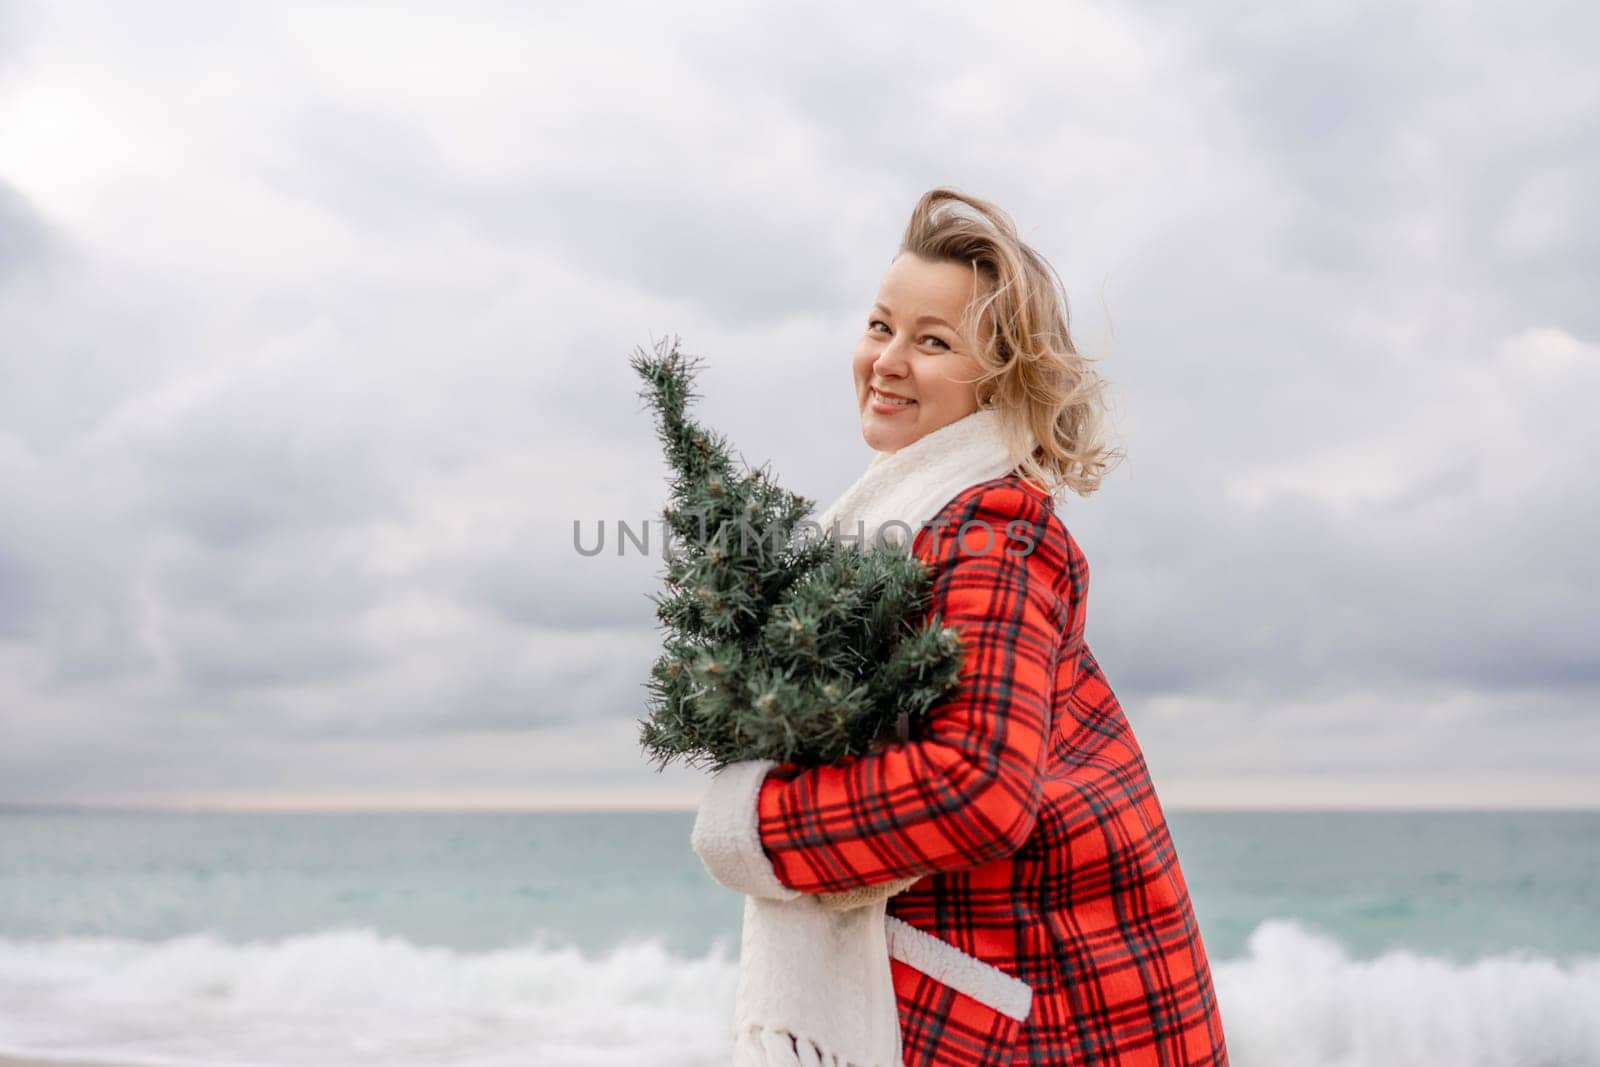 Blond woman holding Christmas tree by the sea. Christmas portrait of a happy woman walking along the beach and holding a Christmas tree in her hands. Dressed in a red coat, white dress. by Matiunina